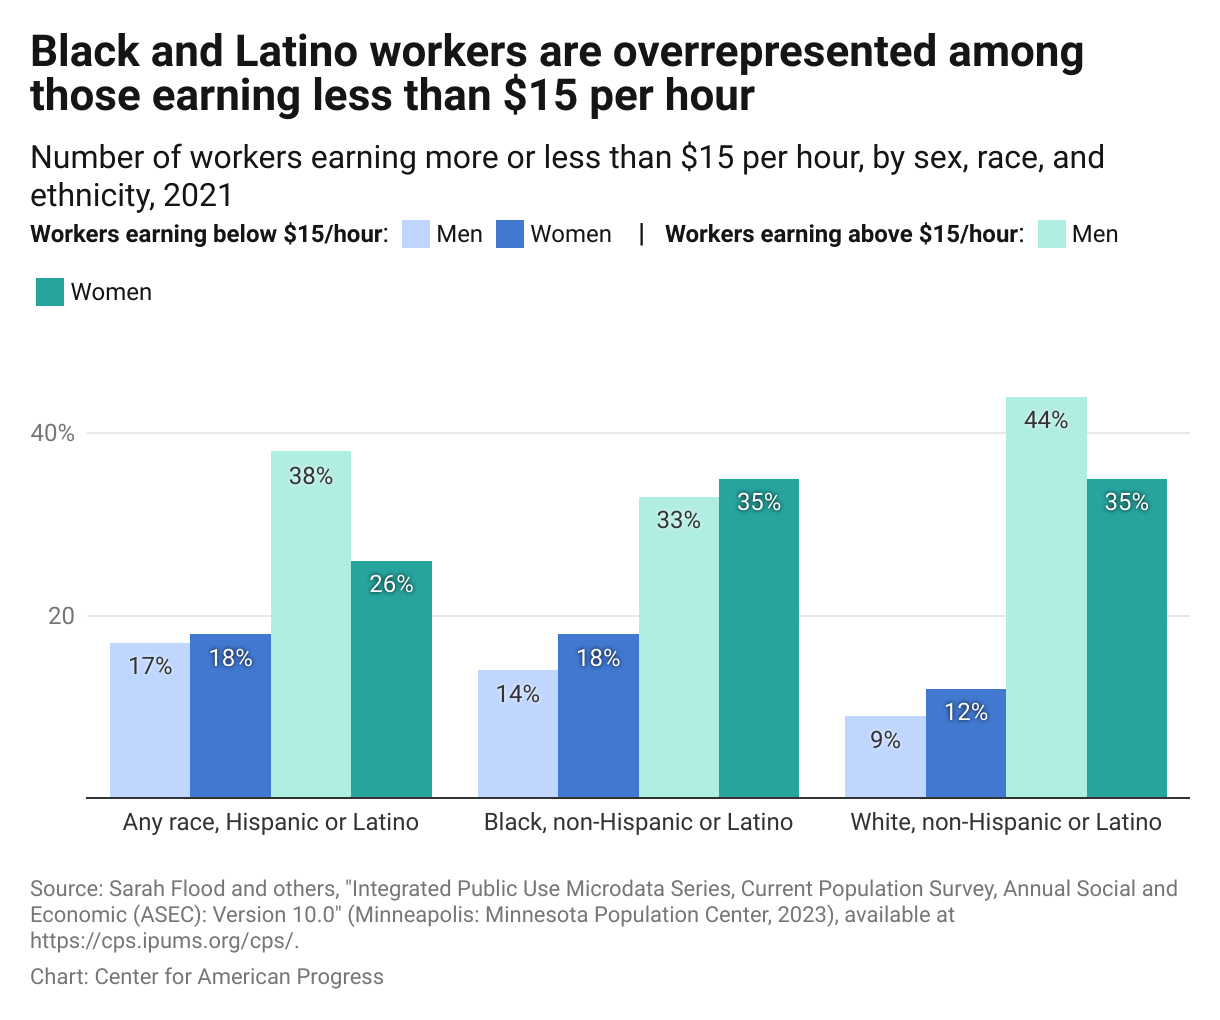 Grouped column chart showing that around 1 in 4 white workers, 1 in 3 Black workers, and 1 in 3 Latino workers earn below $15 per hour.